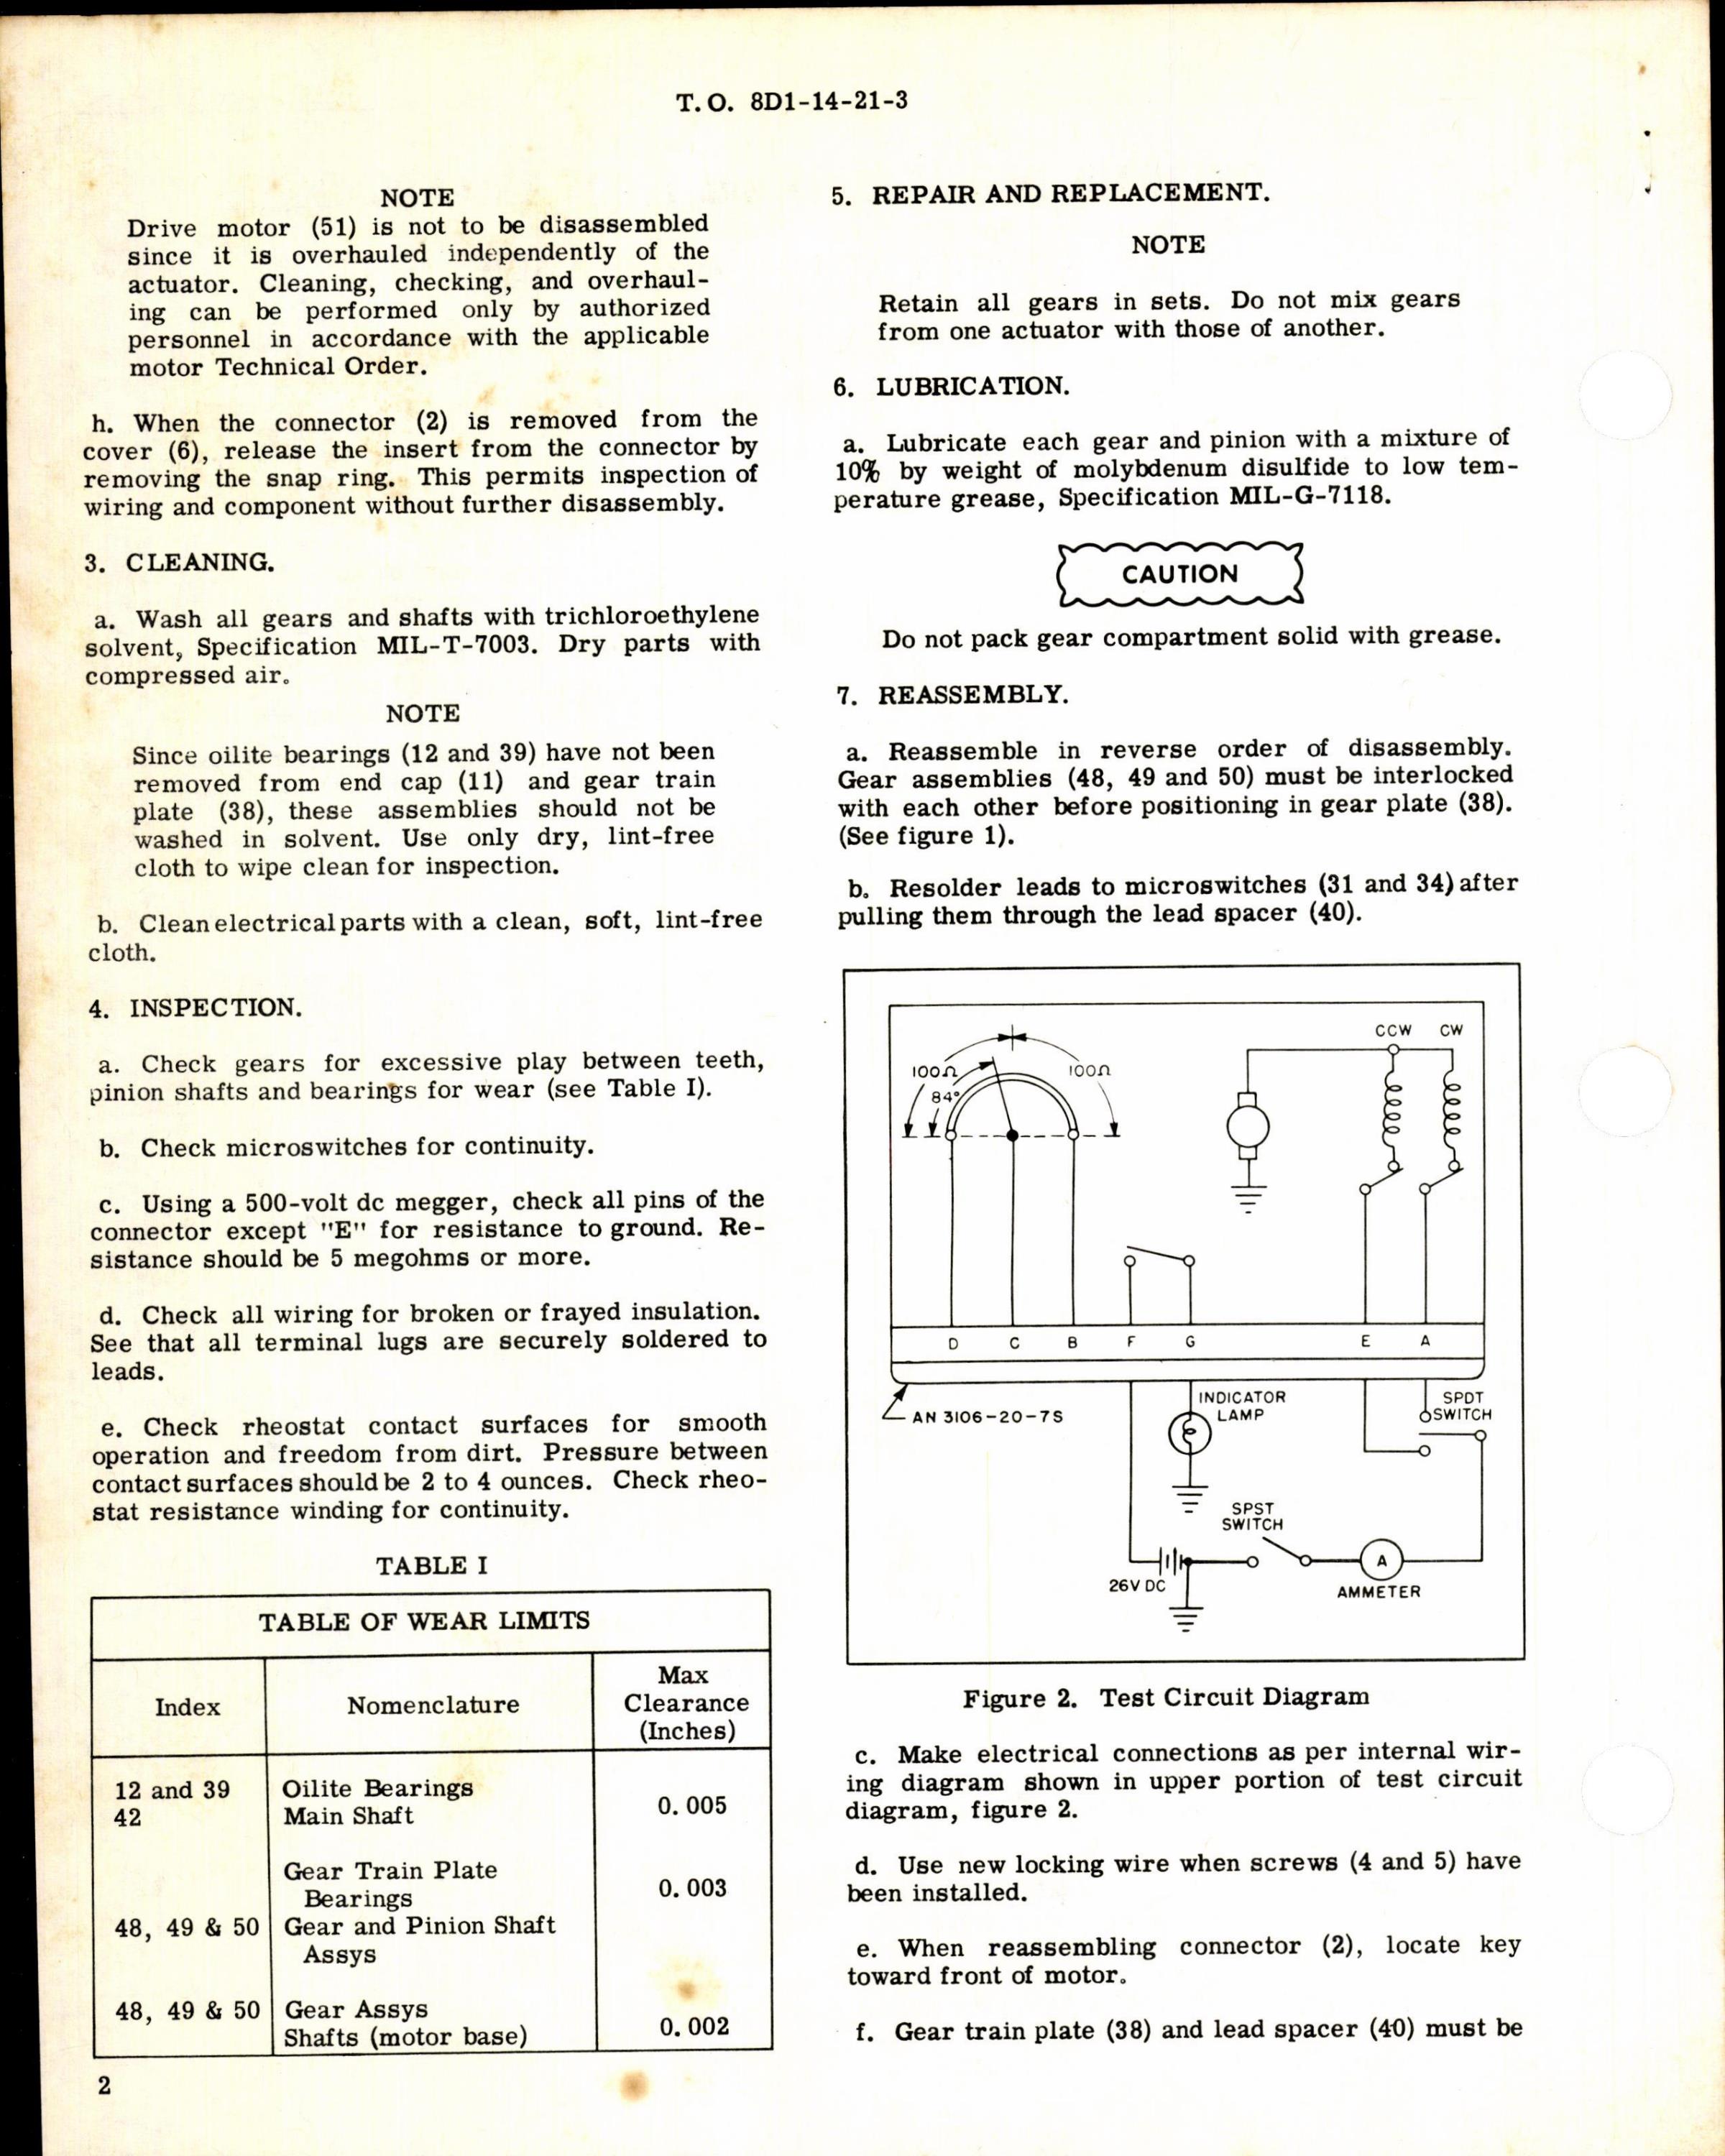 Sample page 2 from AirCorps Library document: Instructions w Parts Breakdown for Actuator, Cockpit Mixing Valve